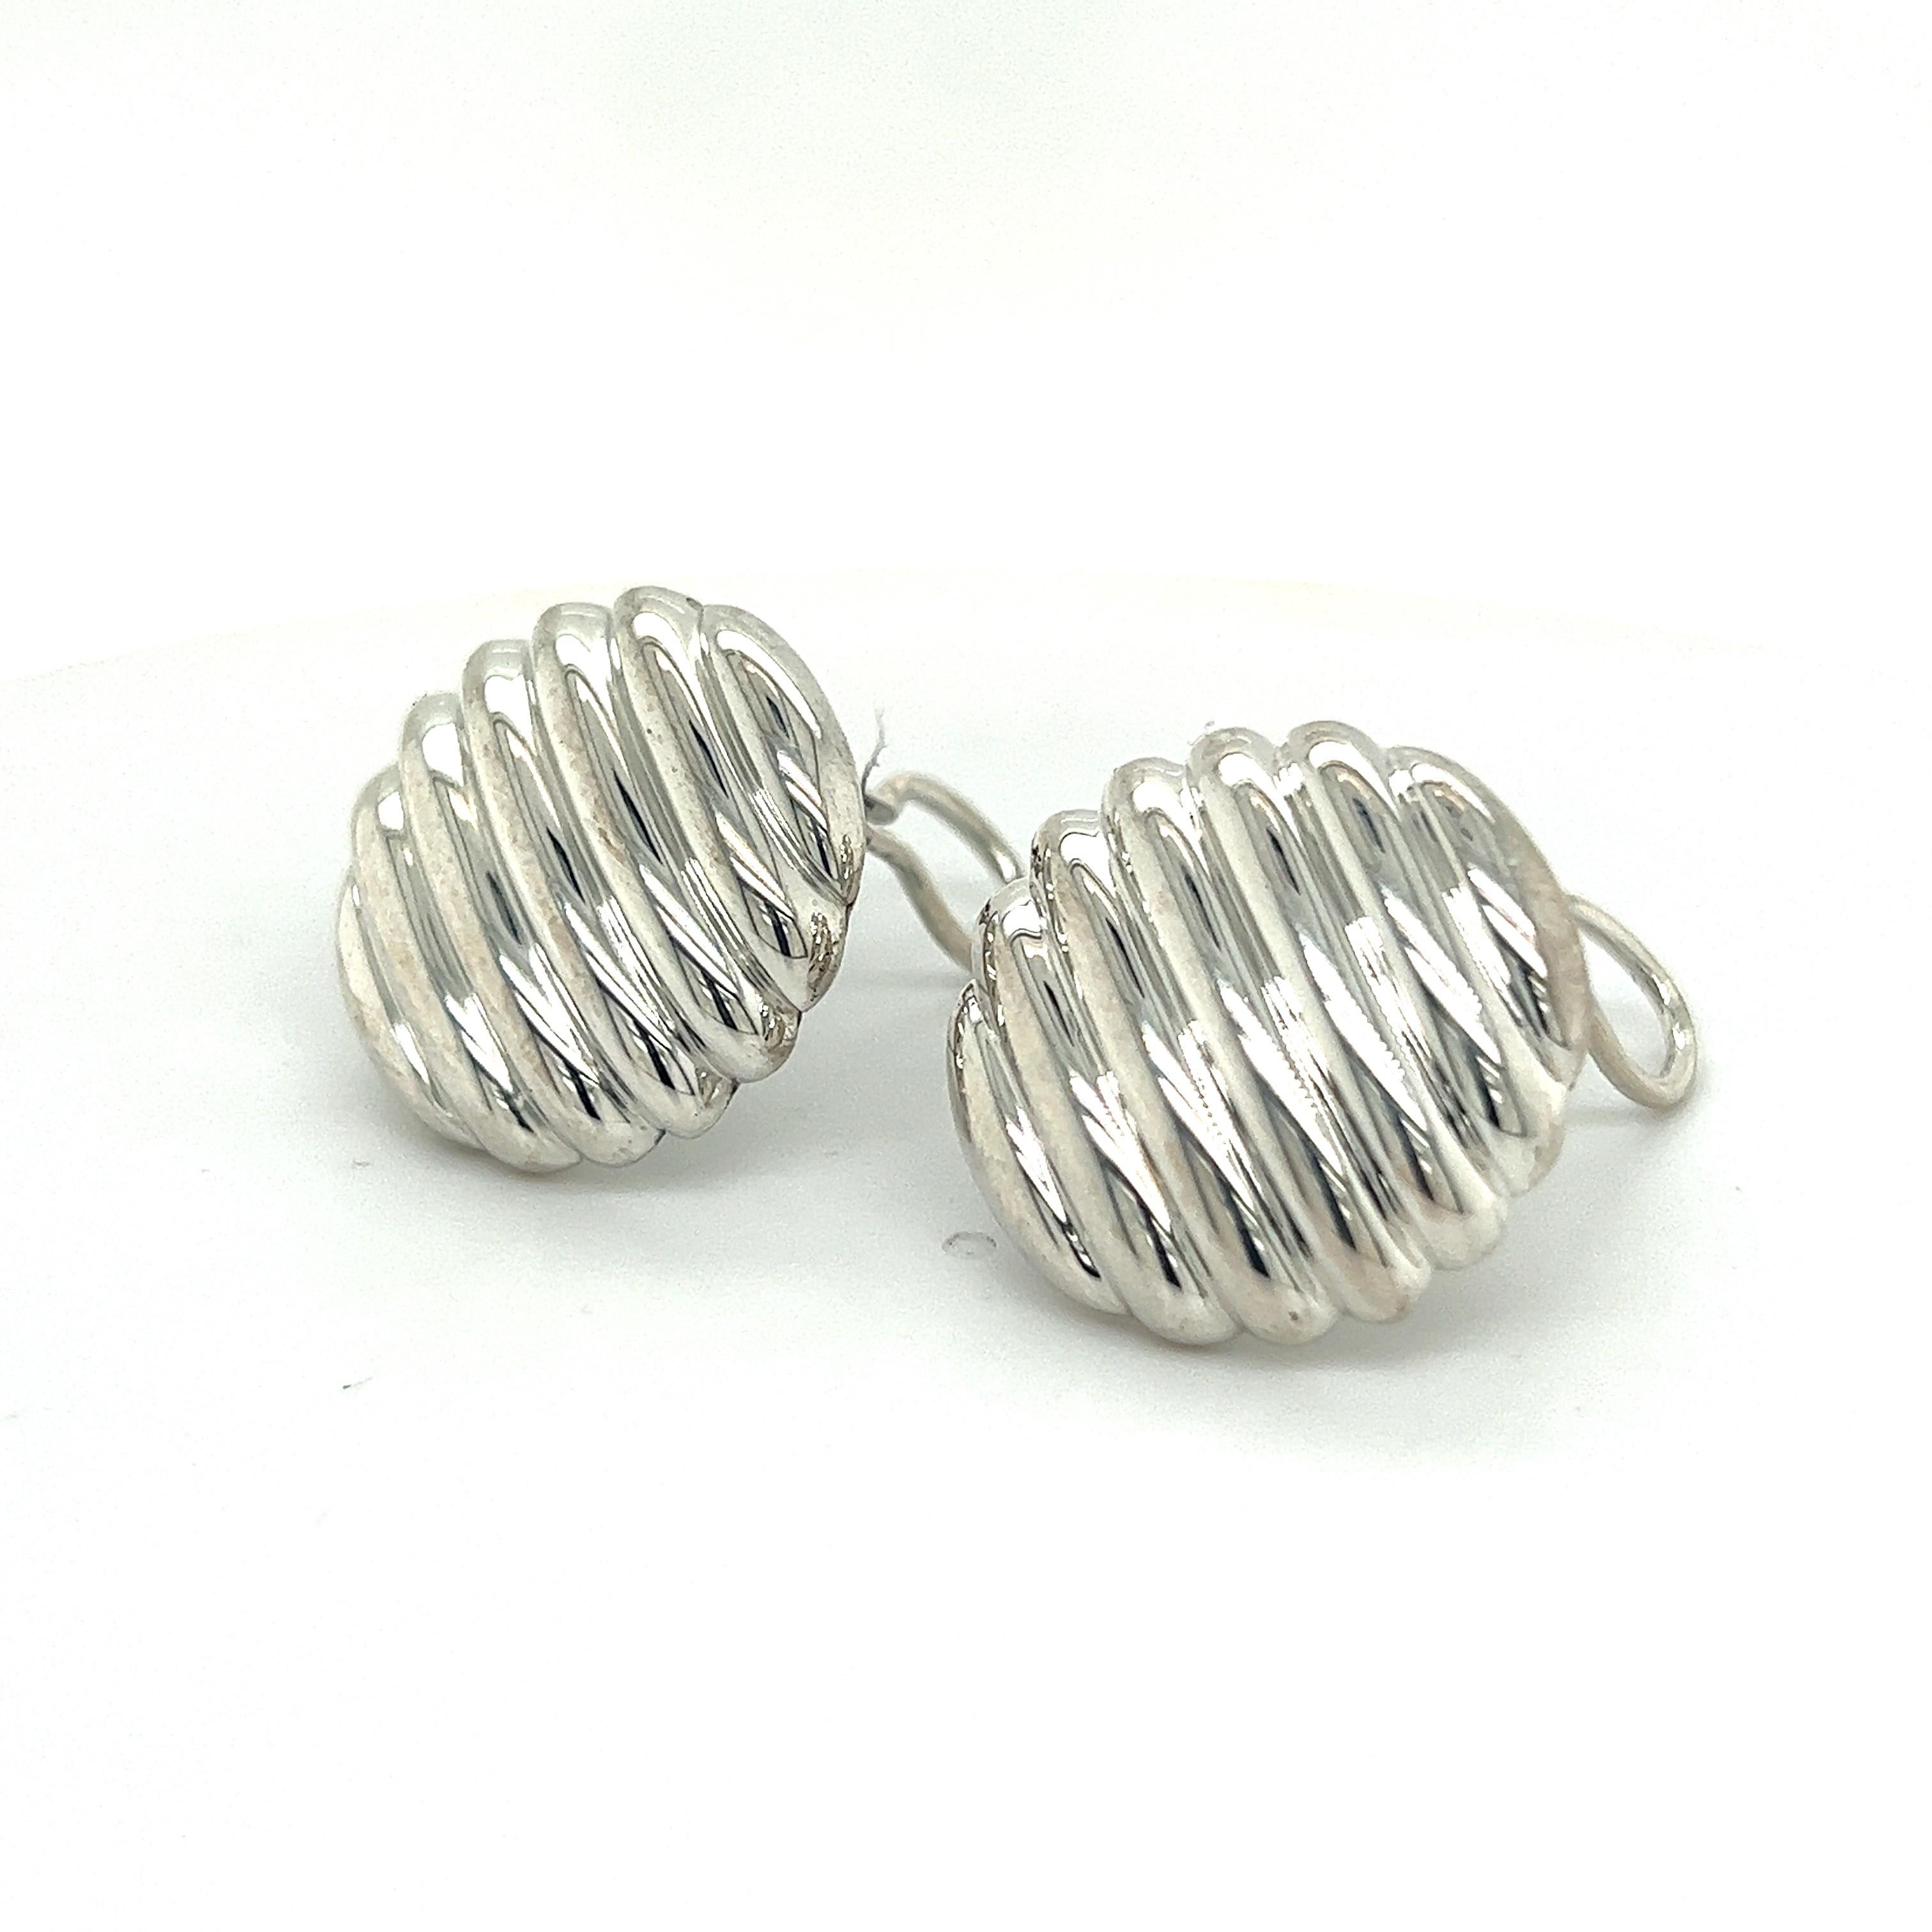 Authentic John Hardy Estate Ribbed Earrings With Omega Back Sterling Silver JH44

TRUSTED SELLER SINCE 2002

PLEASE SEE OUR HUNDREDS OF POSITIVE FEEDBACKS FROM OUR CLIENTS!!

FREE SHIPPING!!

DETAILS
Earrings: Omega Back
Style: Ribbed